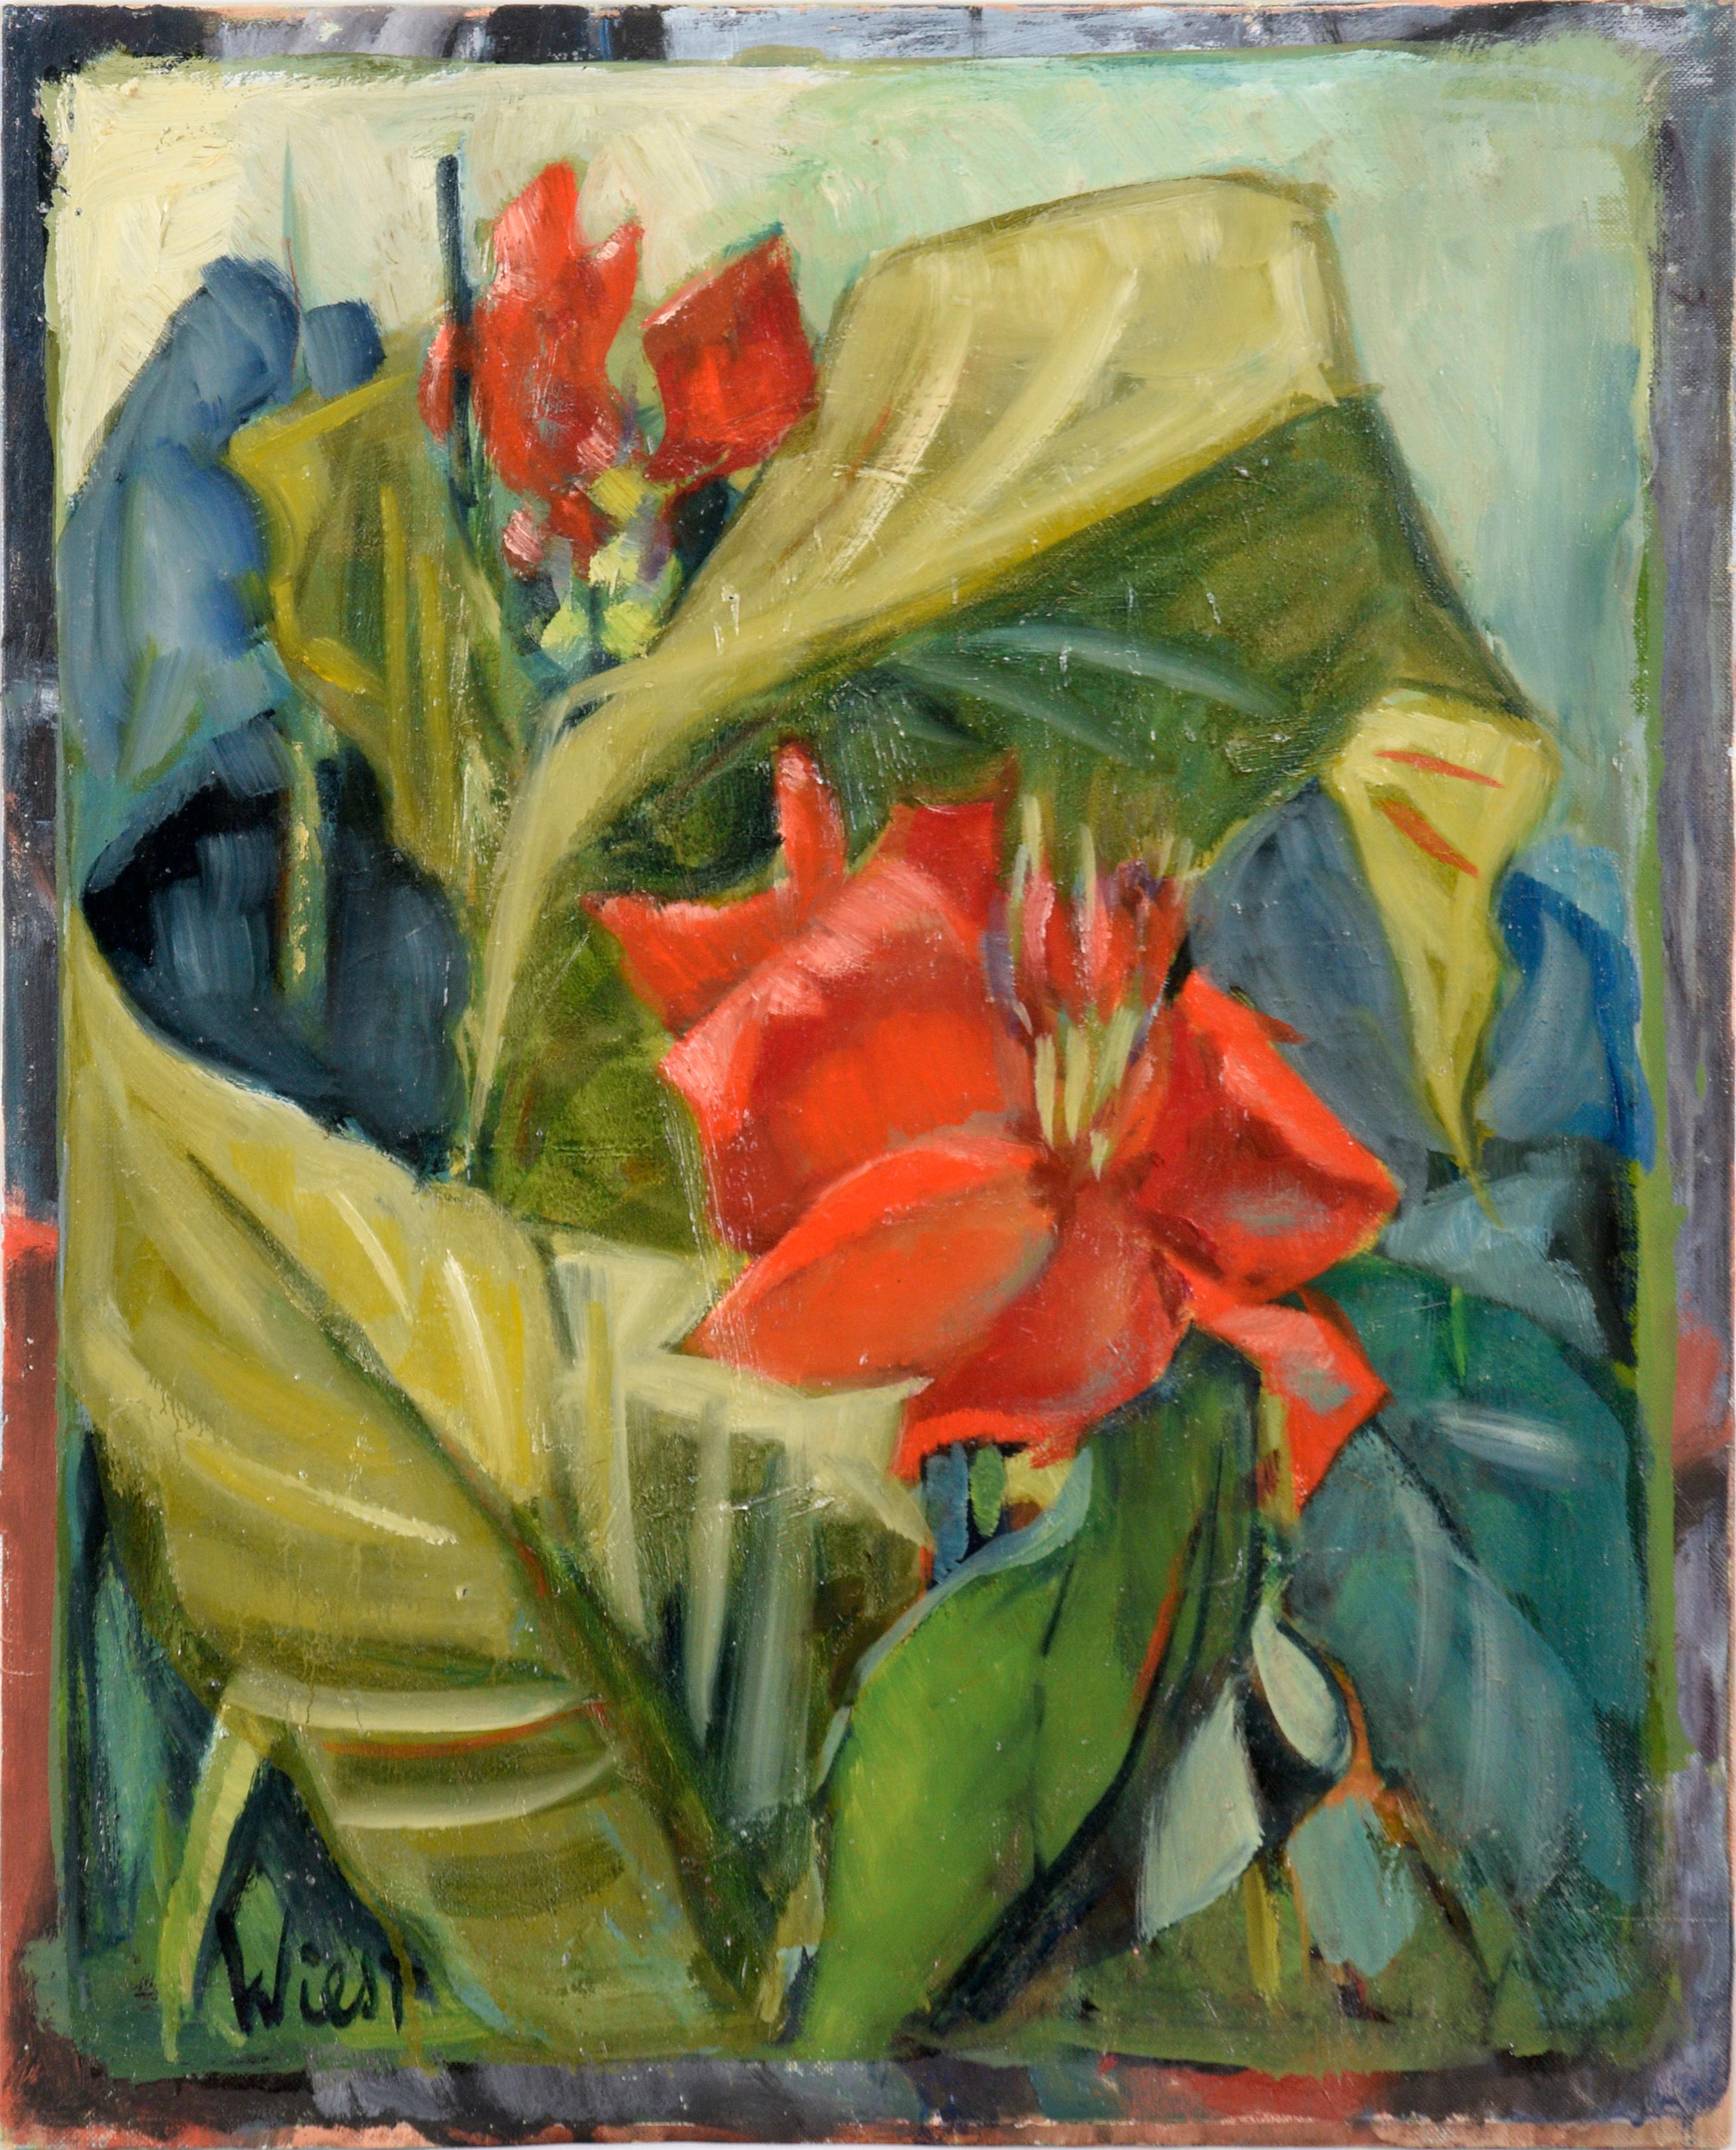 Claire Weist Landscape Painting - "Canna Lilies" - Modernist Still Life in Oil on Artist's Board